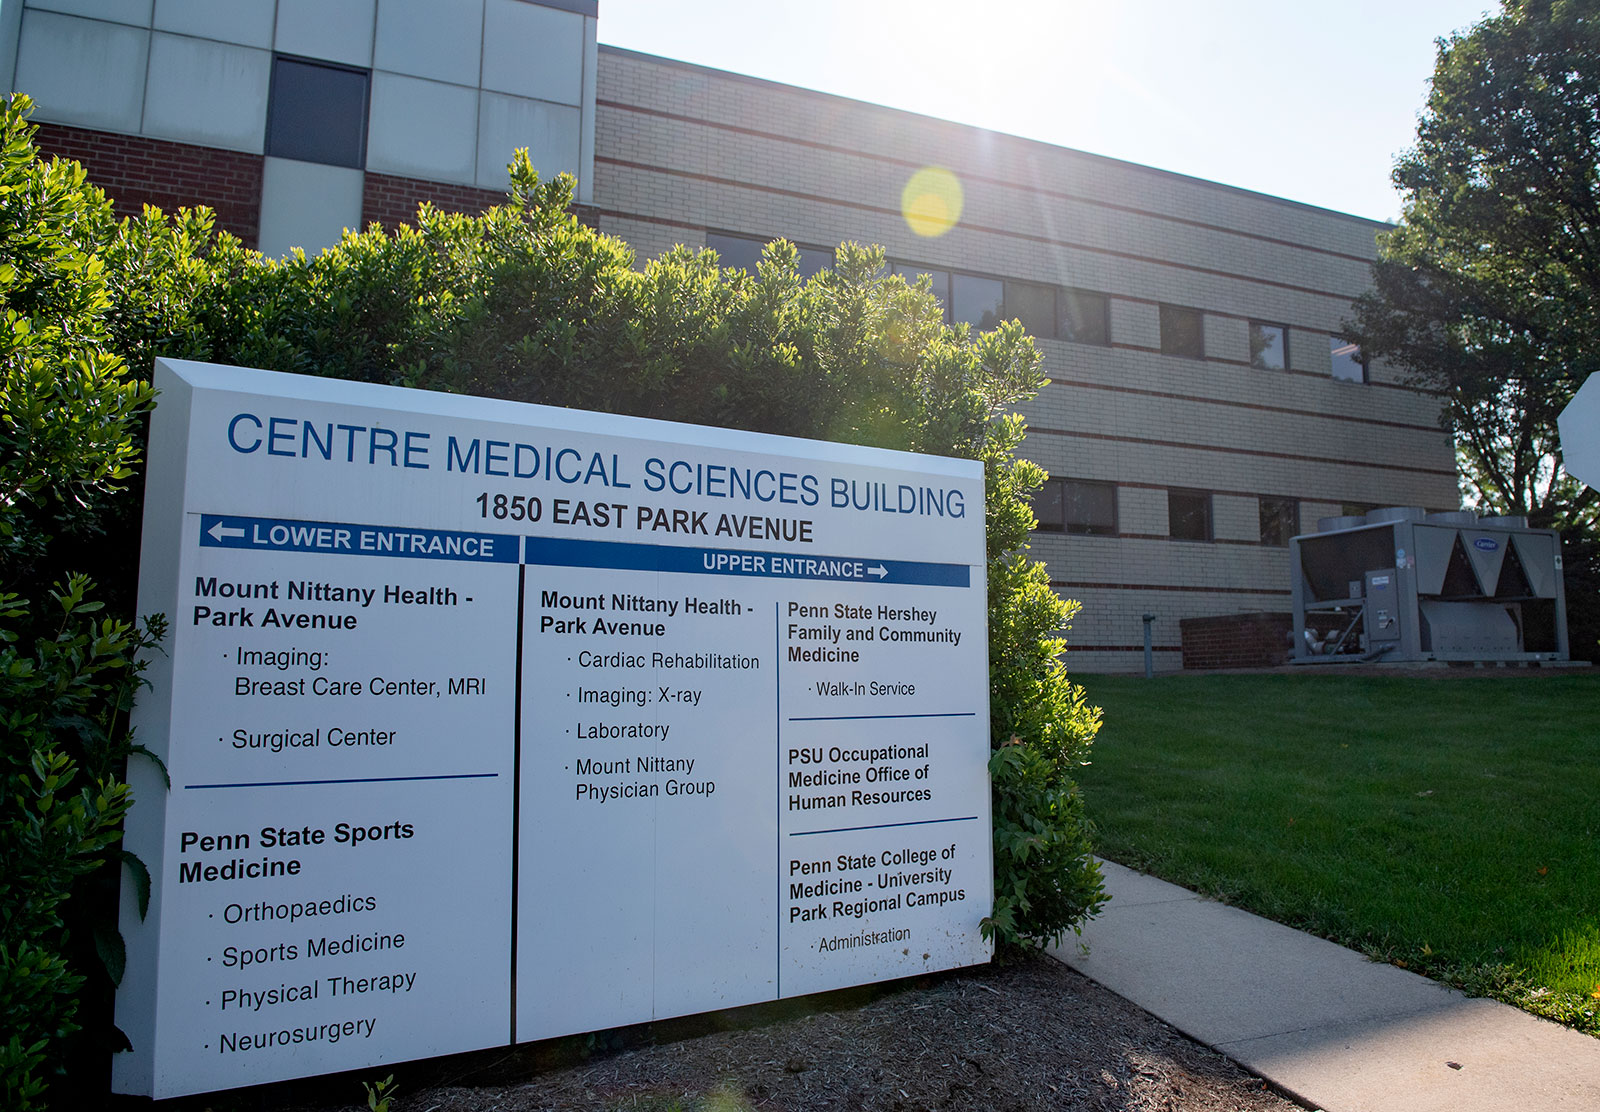 The Centre Medical Science Building in State College is one place where Penn State College of Medicine's University Park Curriculum MD students study. The image shows the front of the building in the sunlight, and the building's sign is visible.